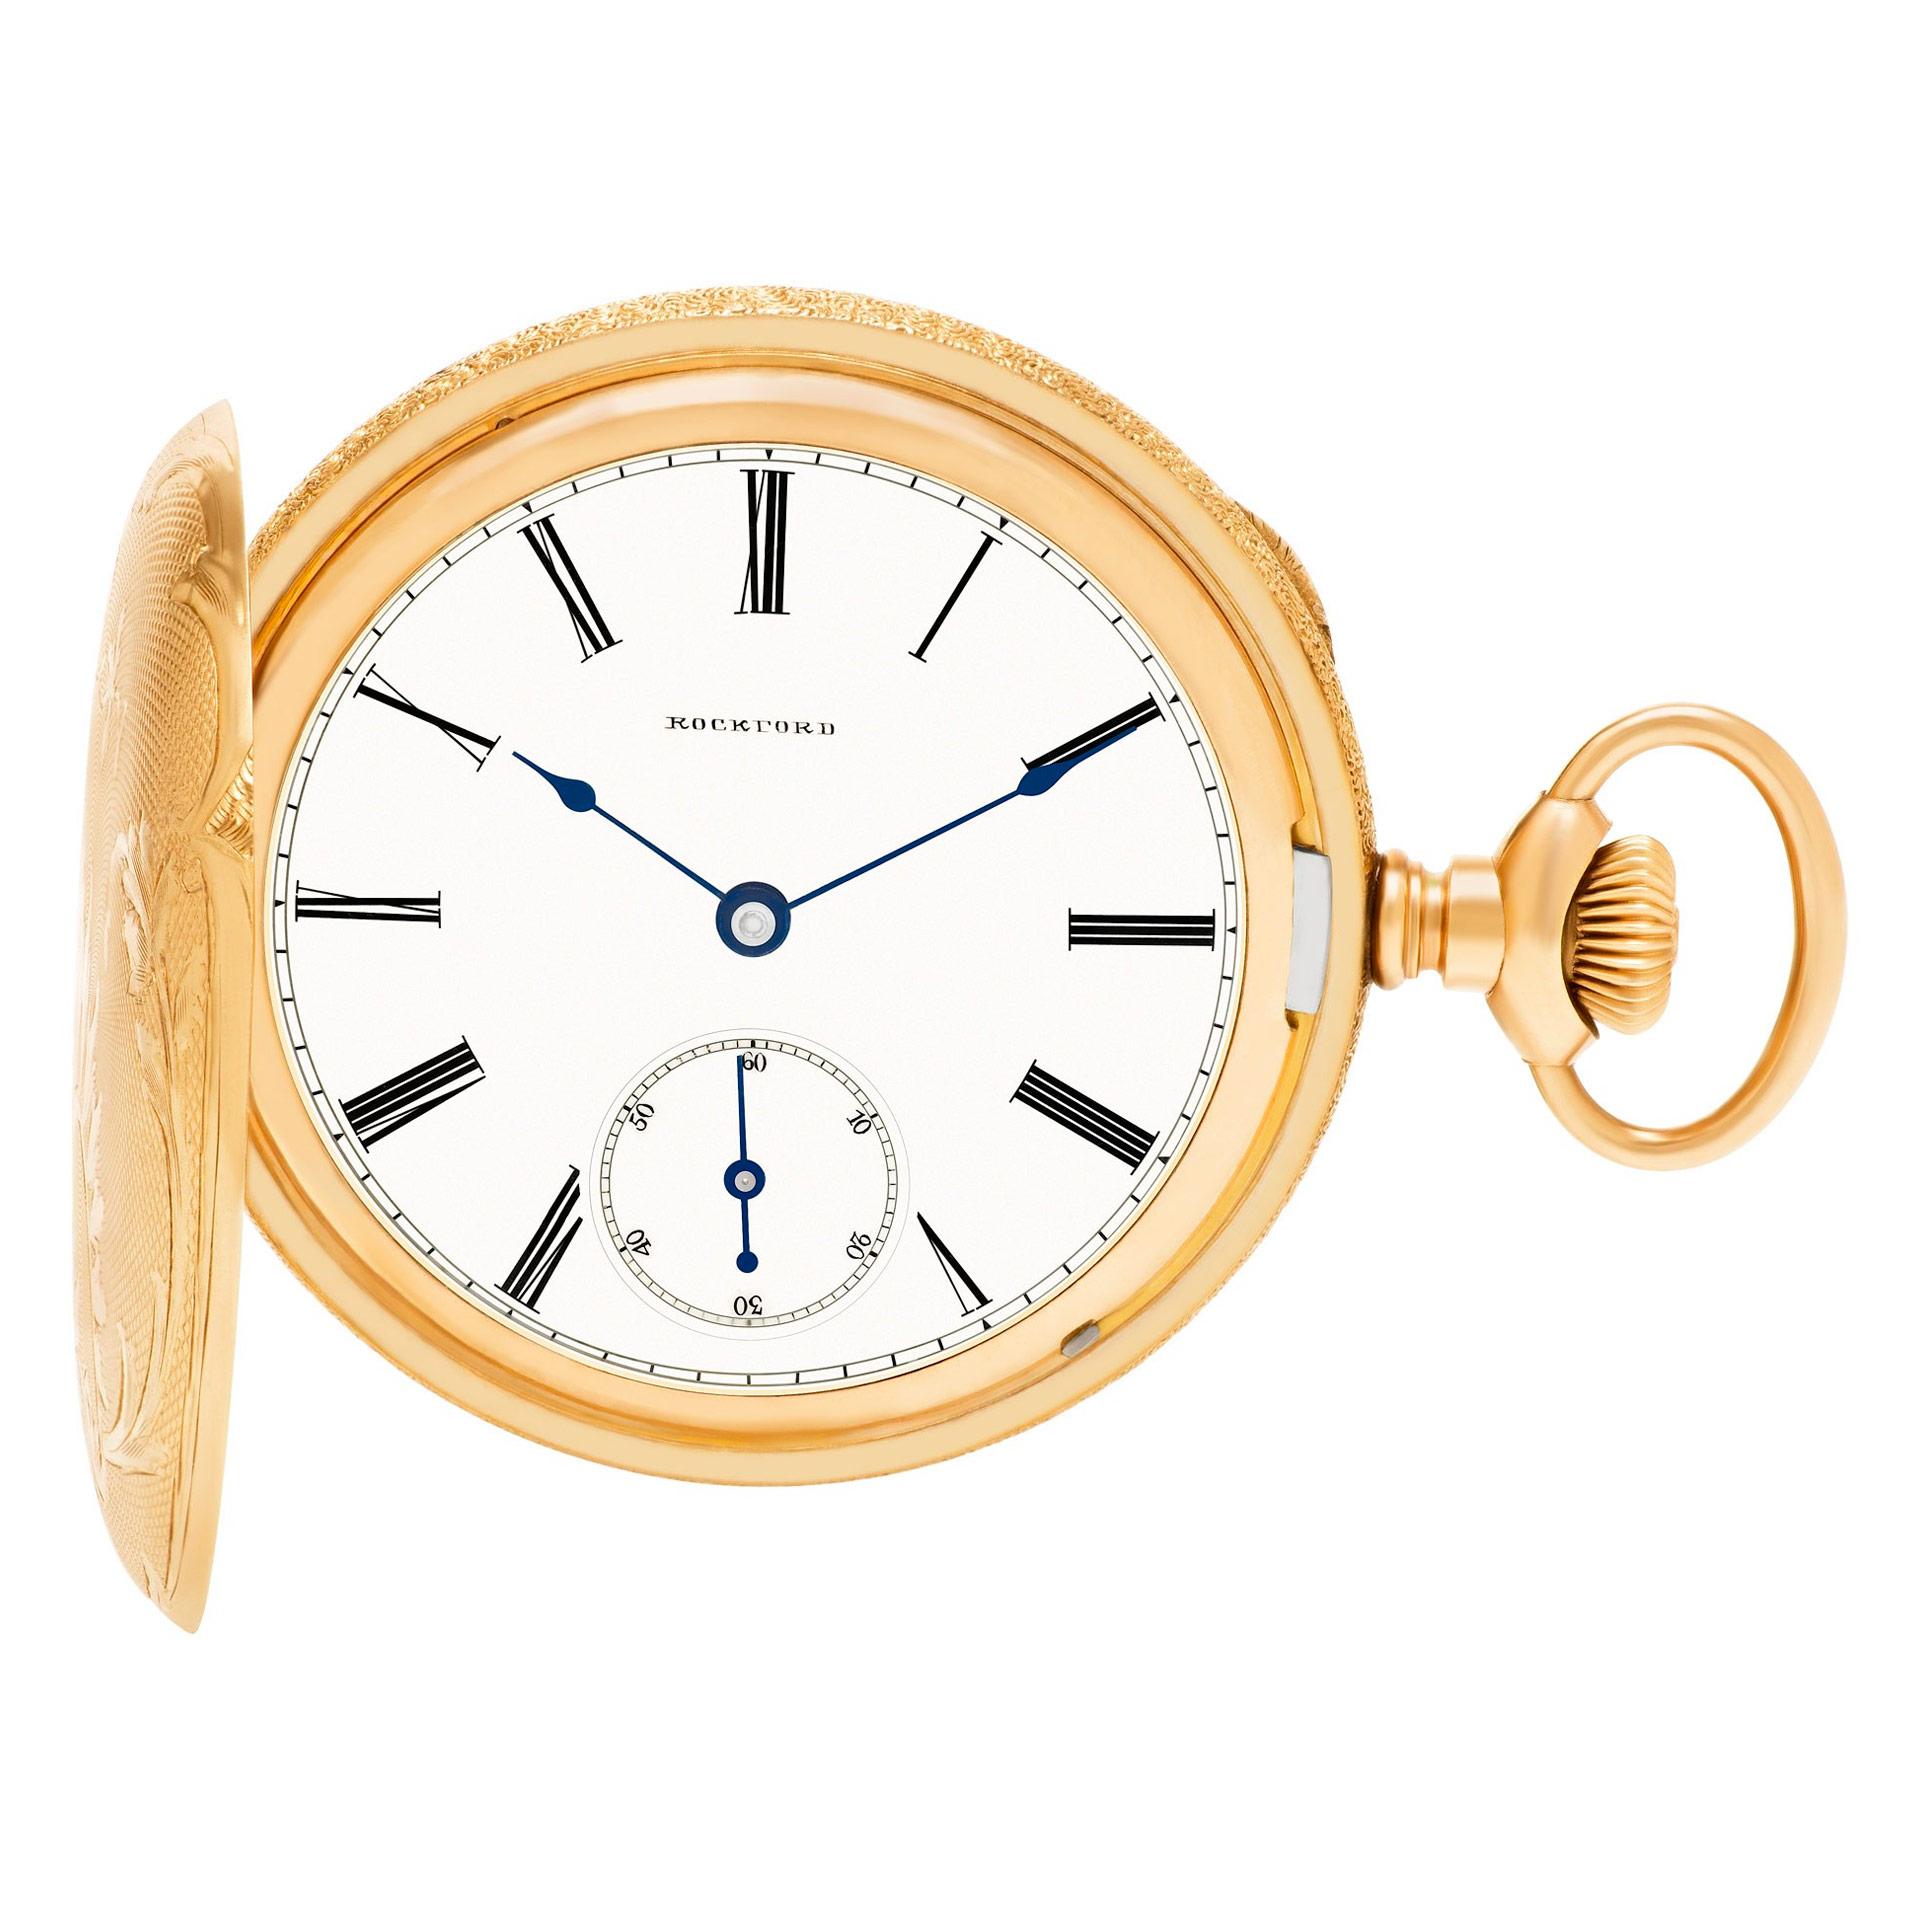 Women's or Men's Rockford Pocket Watch 7125385 Gold Fill White Dial Manual For Sale